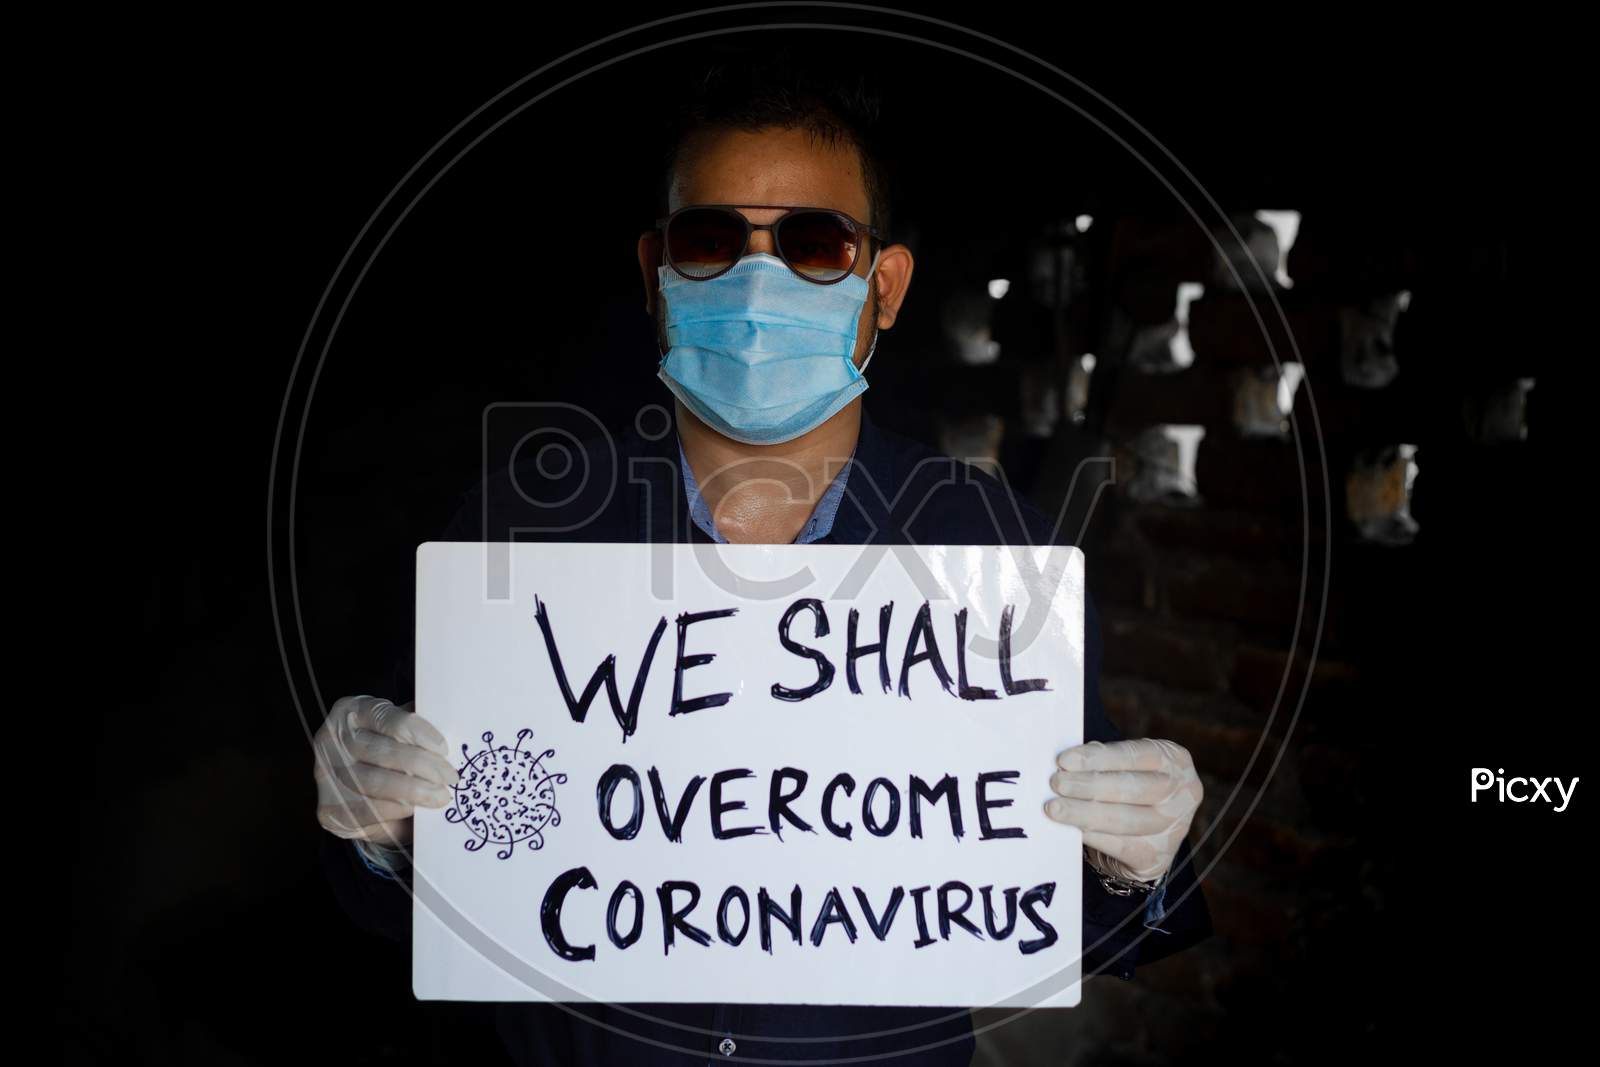 A Young Man Wearing A Medical Mask And Safety Gloves Stands With A Placard Message To "We Shall Overcome Coronavirus". A Man Holding A Placard Massage.